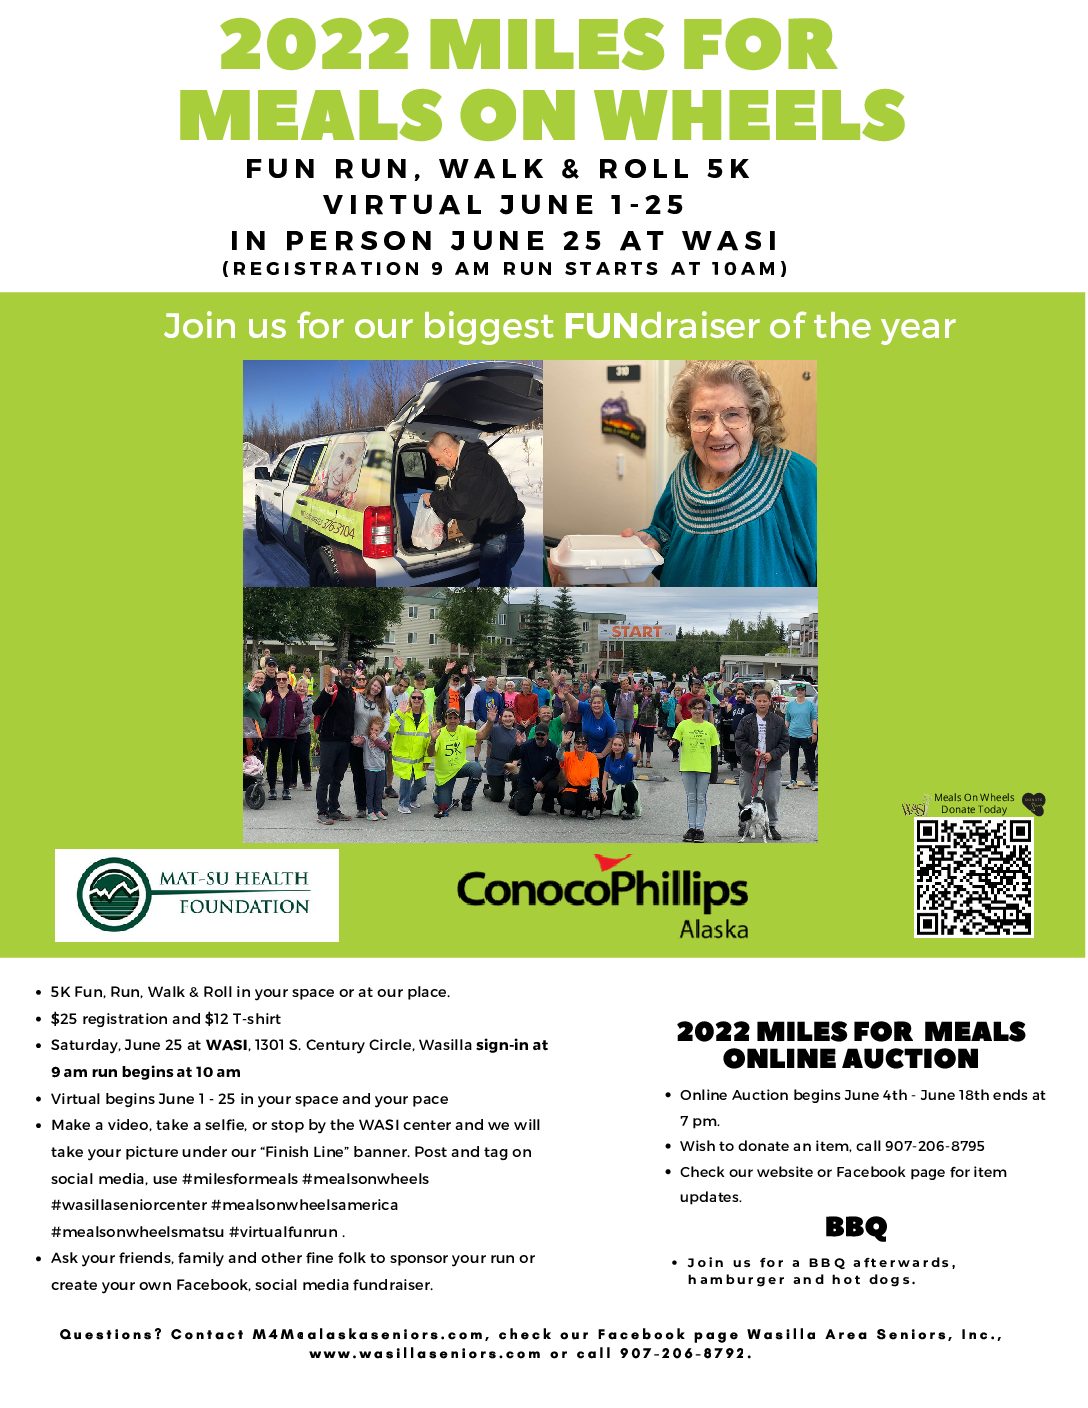 Miles for Meals on Wheels: Virtual